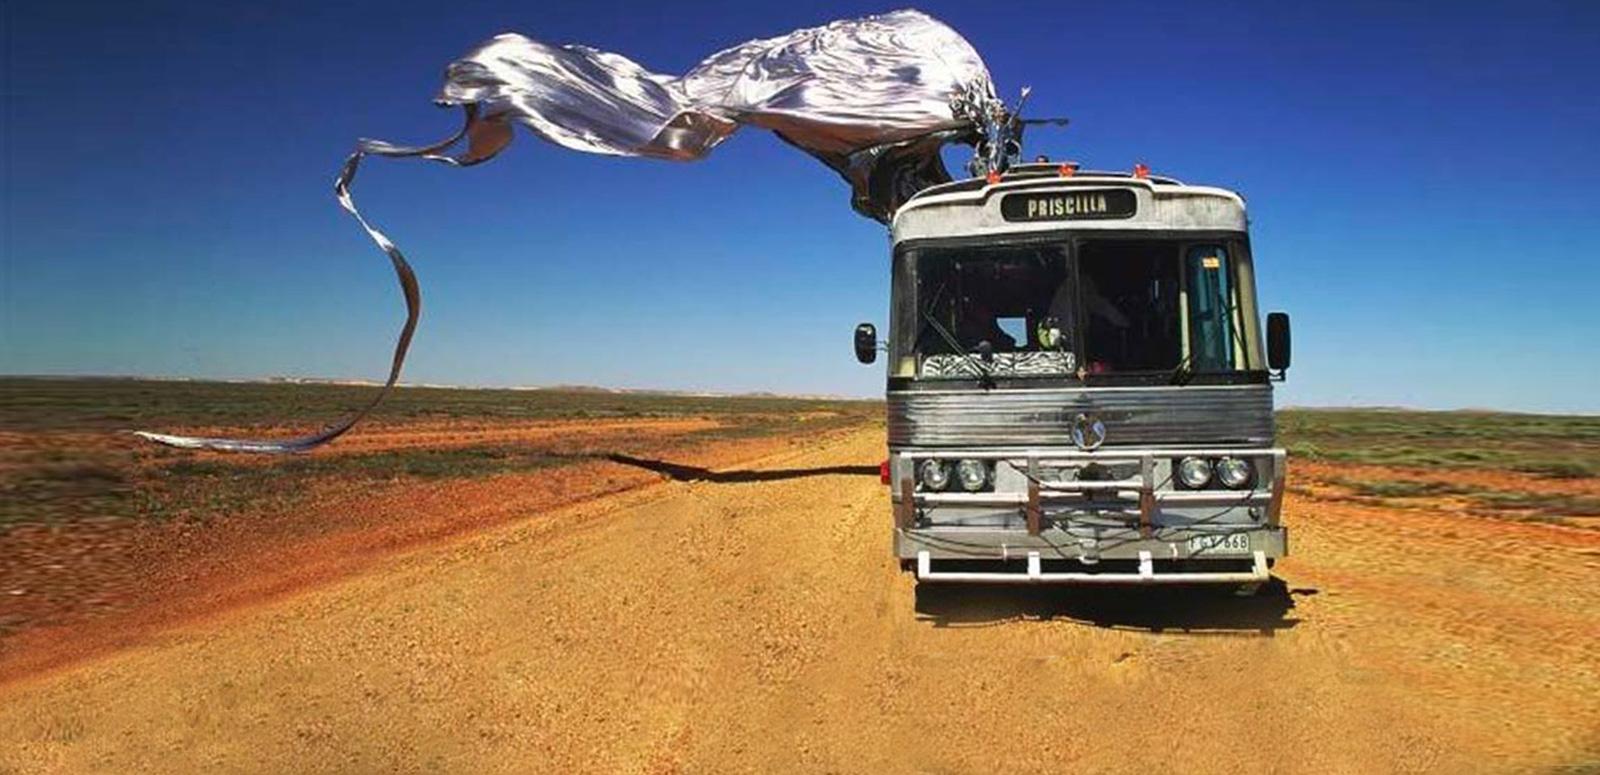 Scene from Priscilla, Queen of the Desert. A tour bus on a dirt road in the desert with blue sky in the background. On top of the bus is Guy Pearce in a shiny silver frock sitting on a giant stiletto shoe with a long train flowing behind the bus.